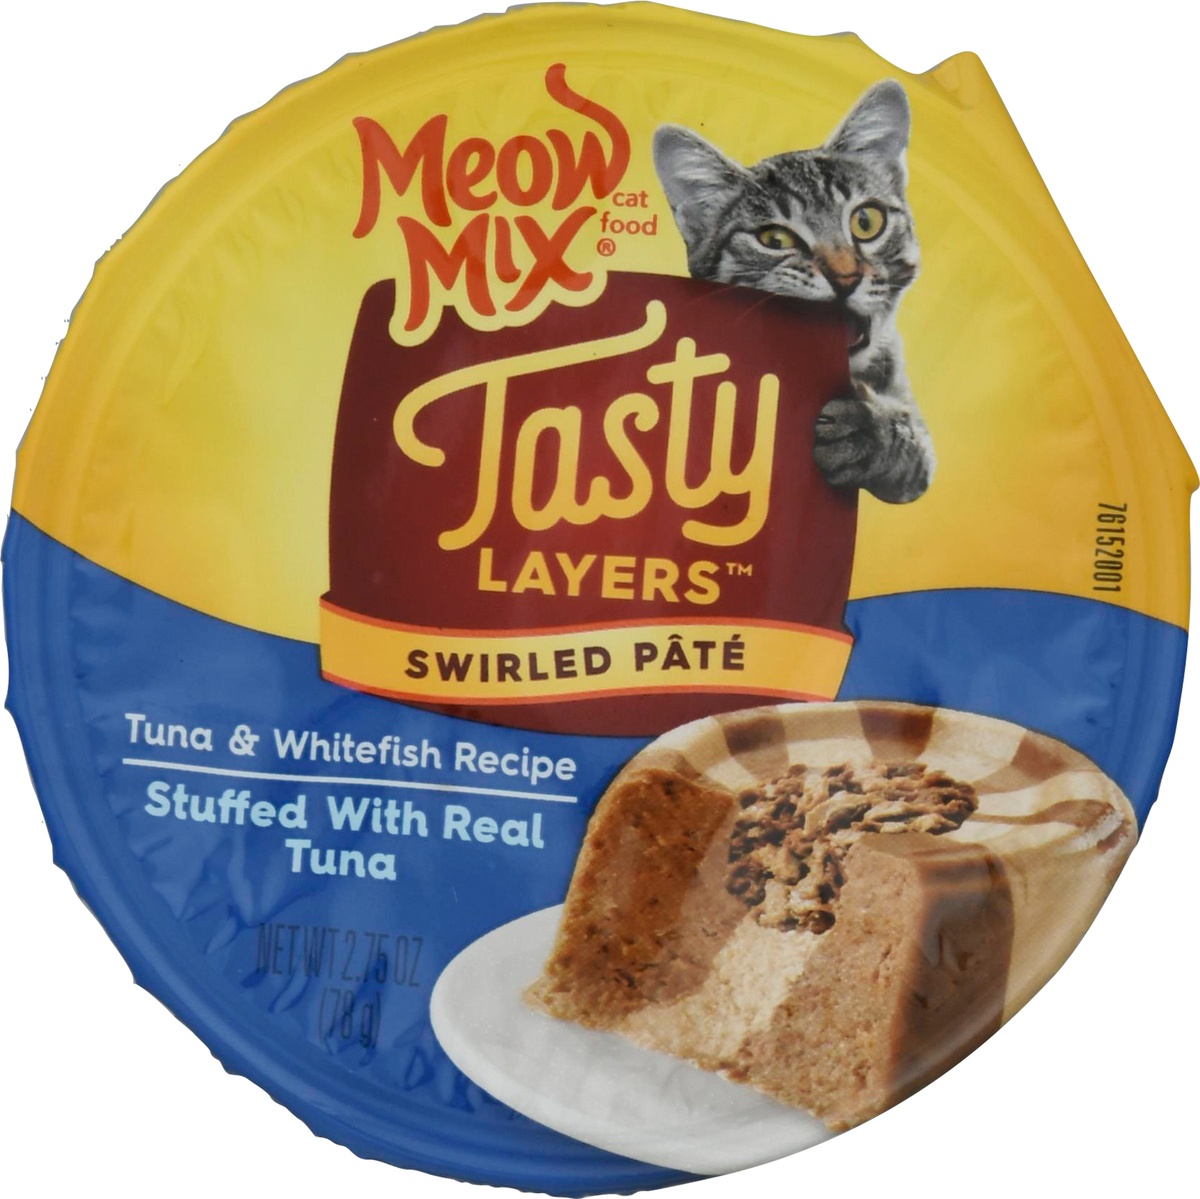 slide 8 of 10, Meow Mix Tasty Layers Swirled Paté Tuna and Whitefish Recipe Stuffed with Real Tuna Wet Cat Food, 2.75 oz